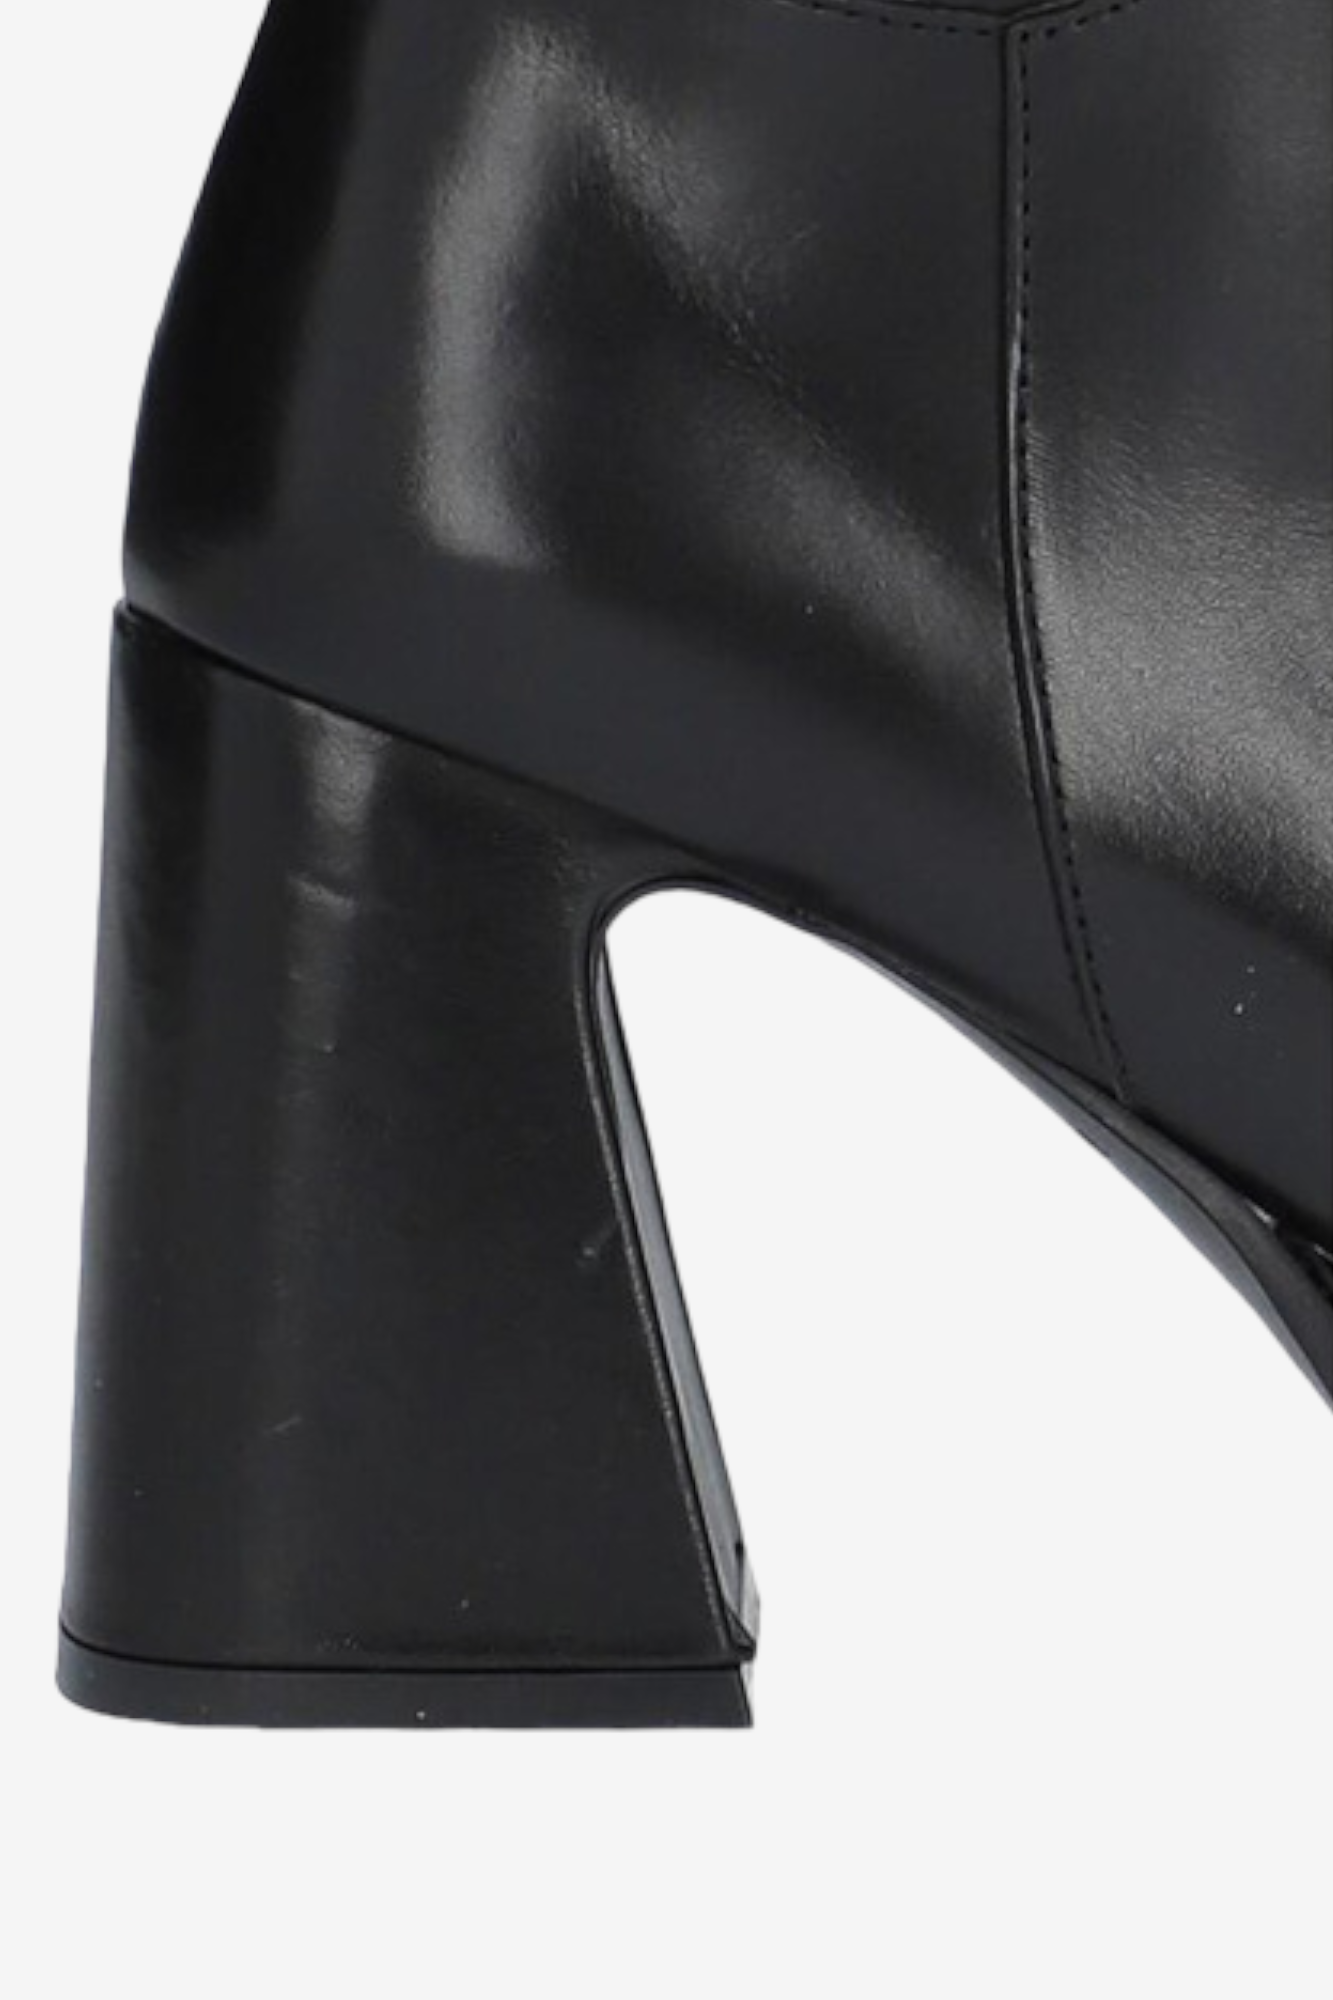 ALPE 2748 BLACK LEATHER KNEE HIGH BOOT